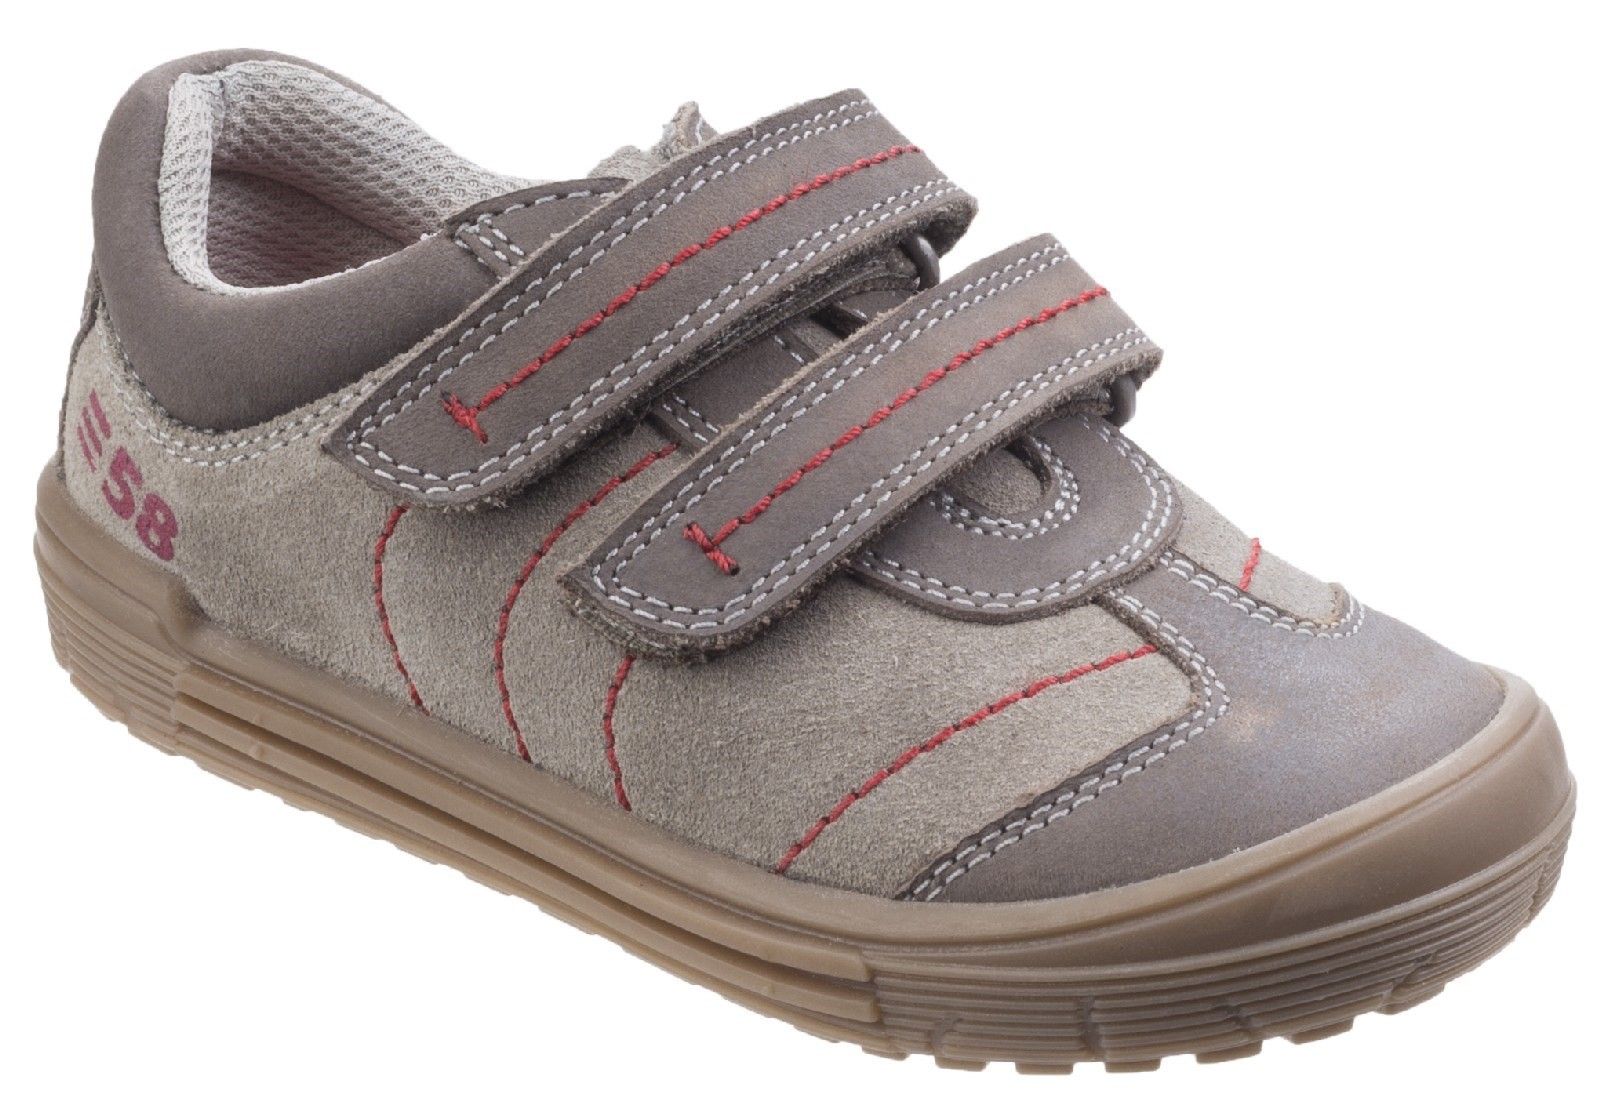 The Finn Boys pre walker shoe in soft leather with double adjustable touch fastening and contrast stitch detail features a sturdy sole and padded collar giving his little feet the extra support they need.Fit Left Fit Right insoles. 
Multi-directional flex technology. 
Contoured cup heel. 
Memory foam comfort footbed. 
Easy on, stay on hook and loop closure.